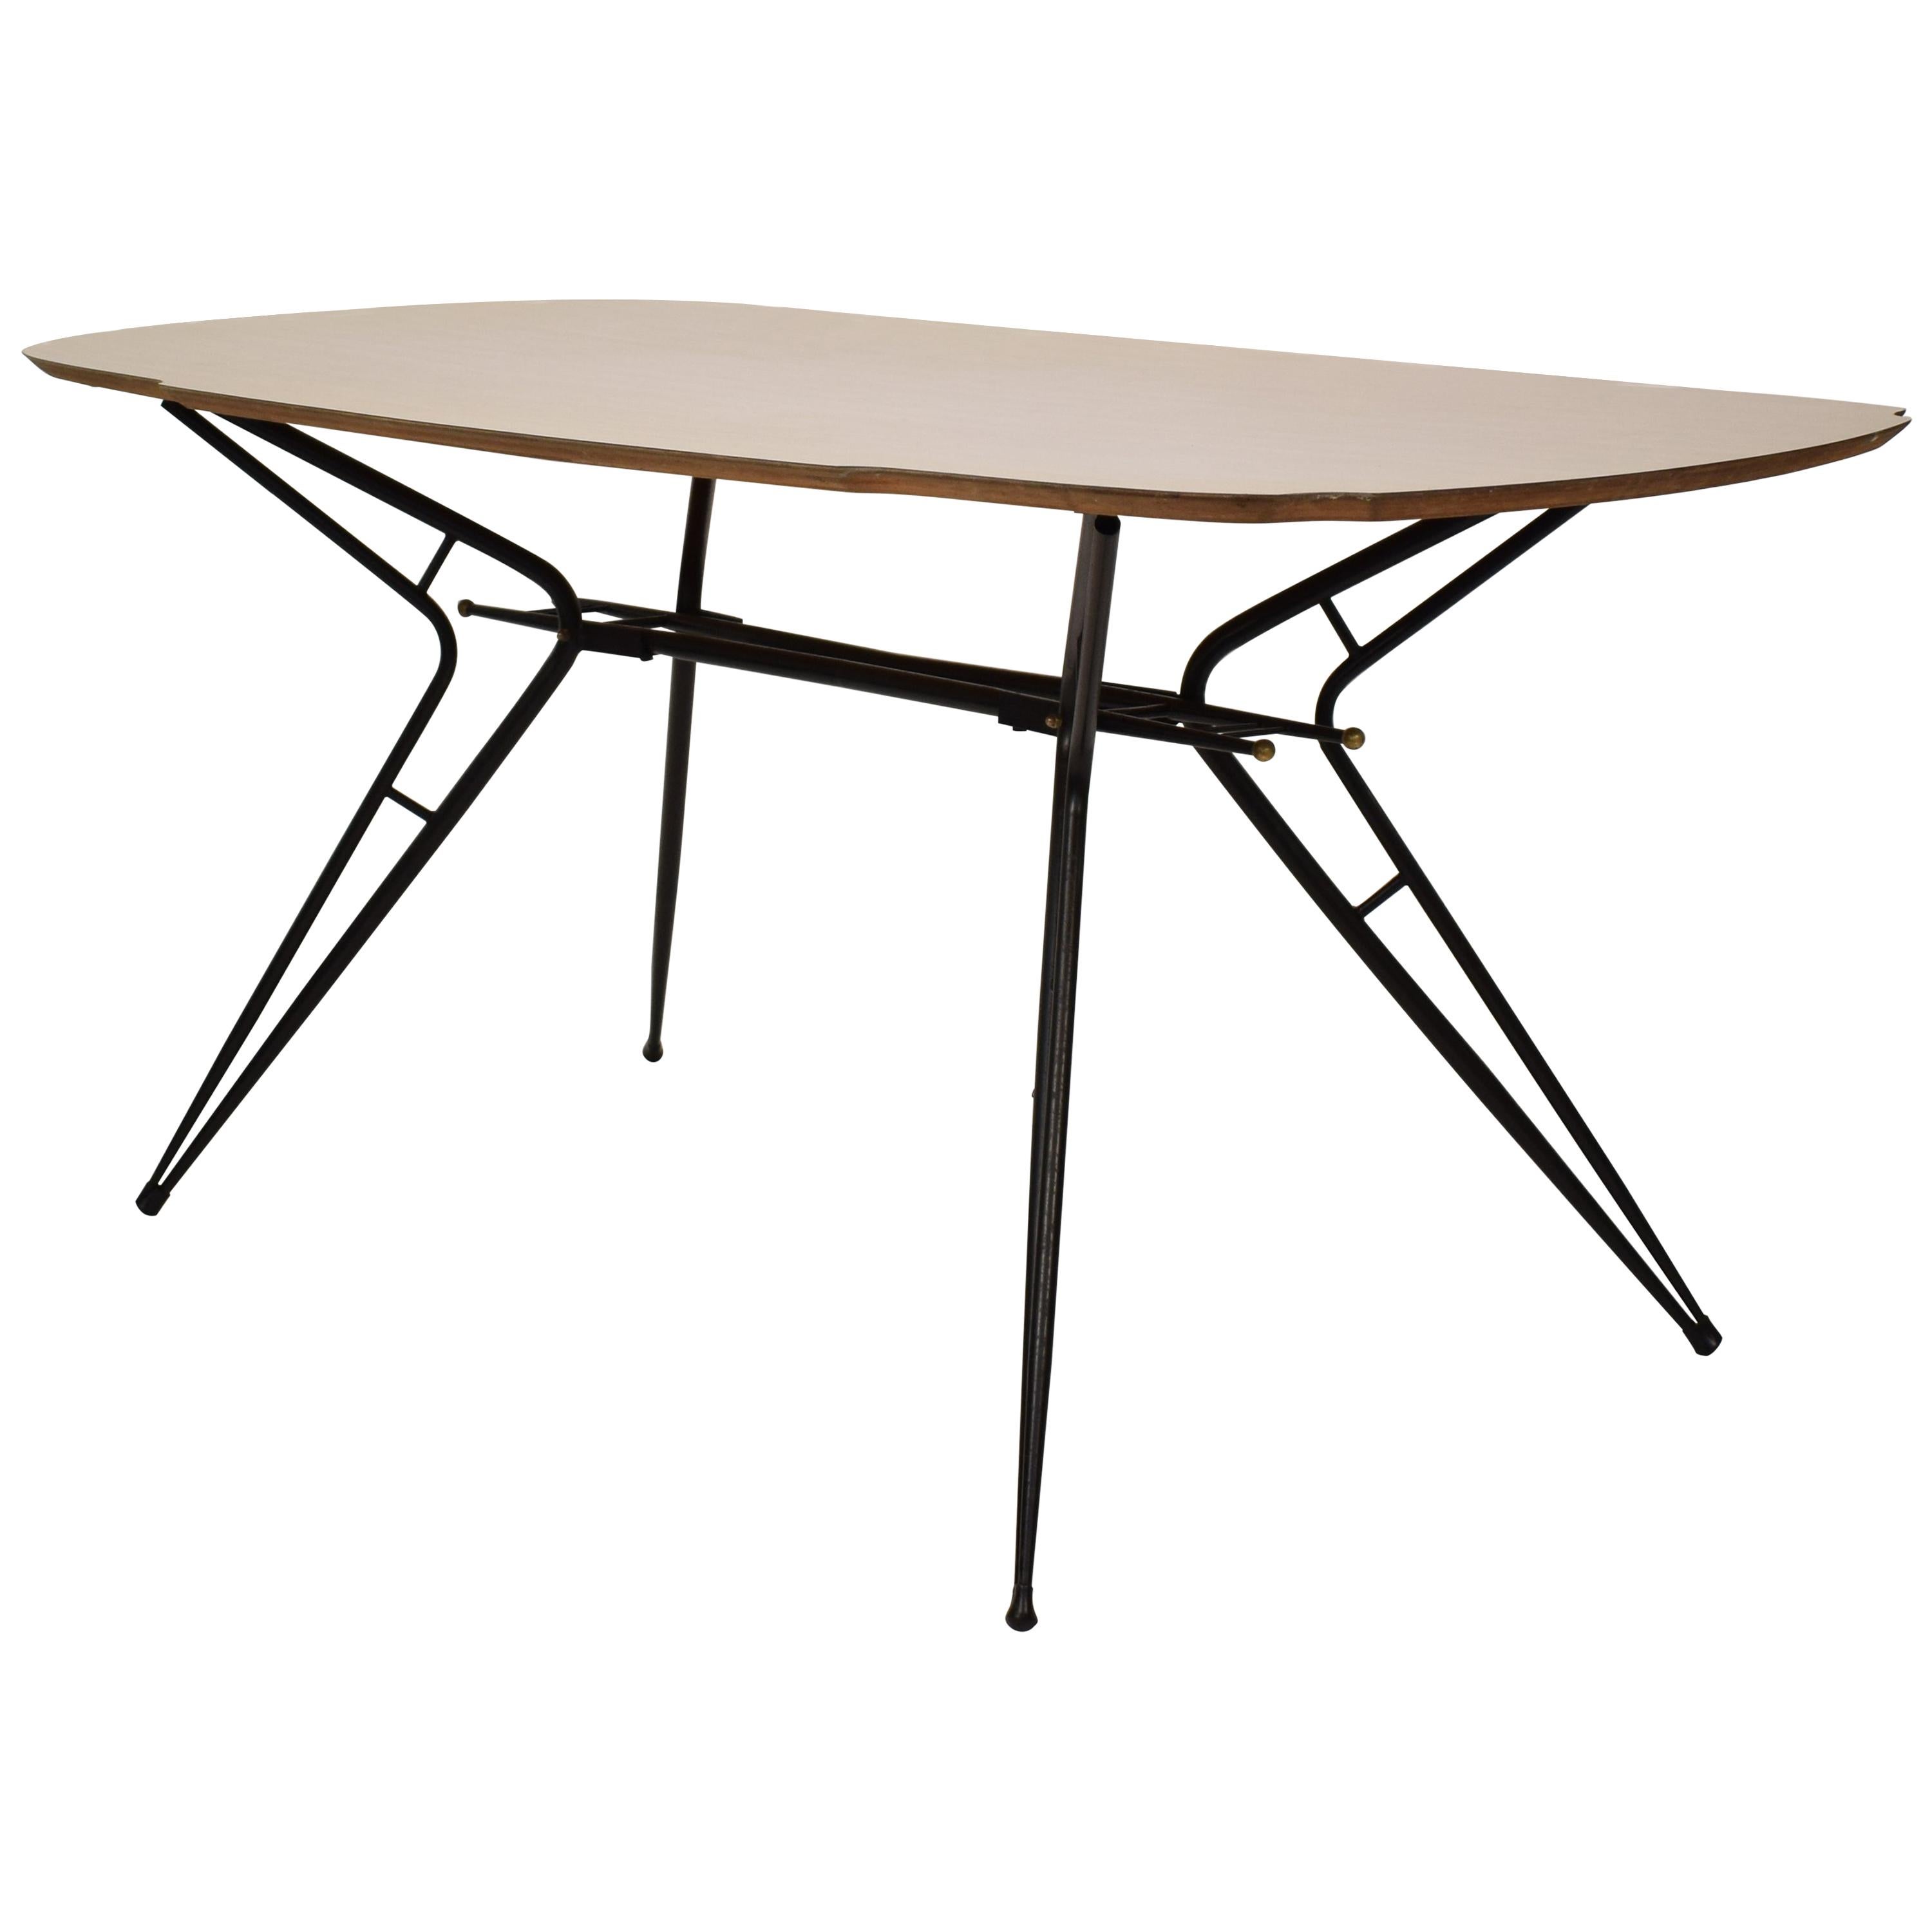 Midcentury Italian Black and White Dining Table Attributed to Ico Parisi, 1958 For Sale